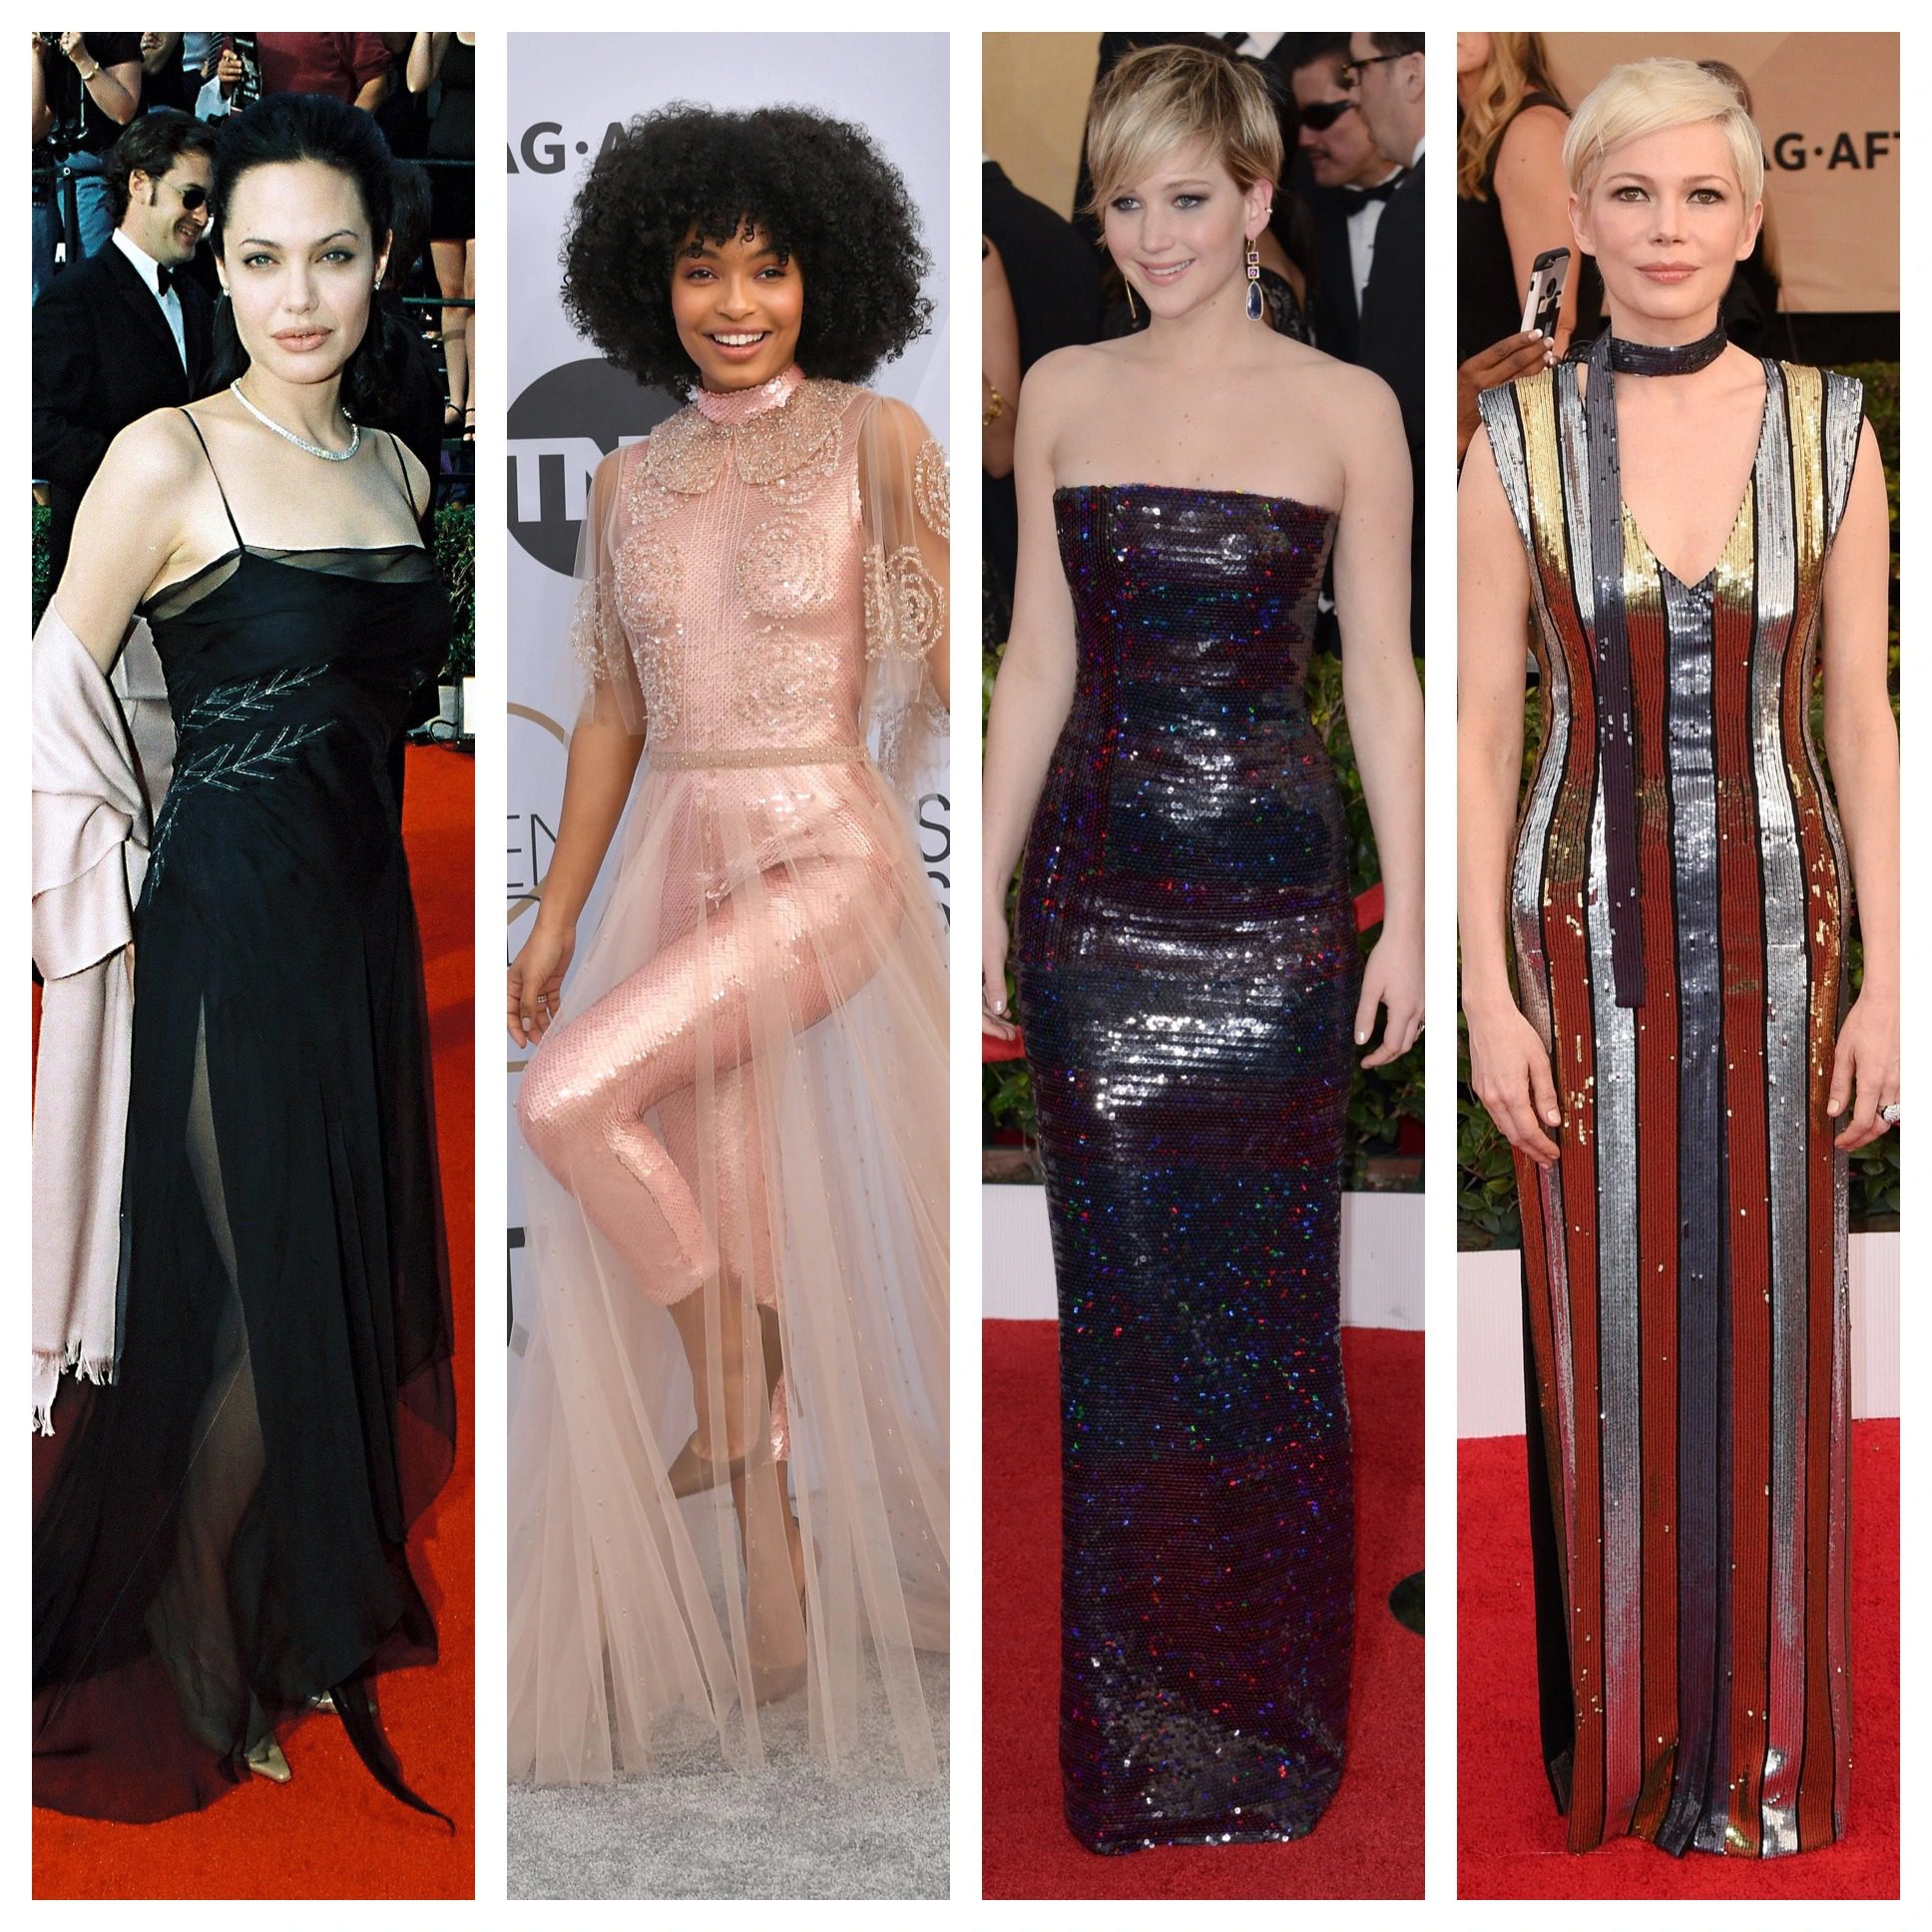 47+ Memorable Red Carpet Appearances That Astounded The Public